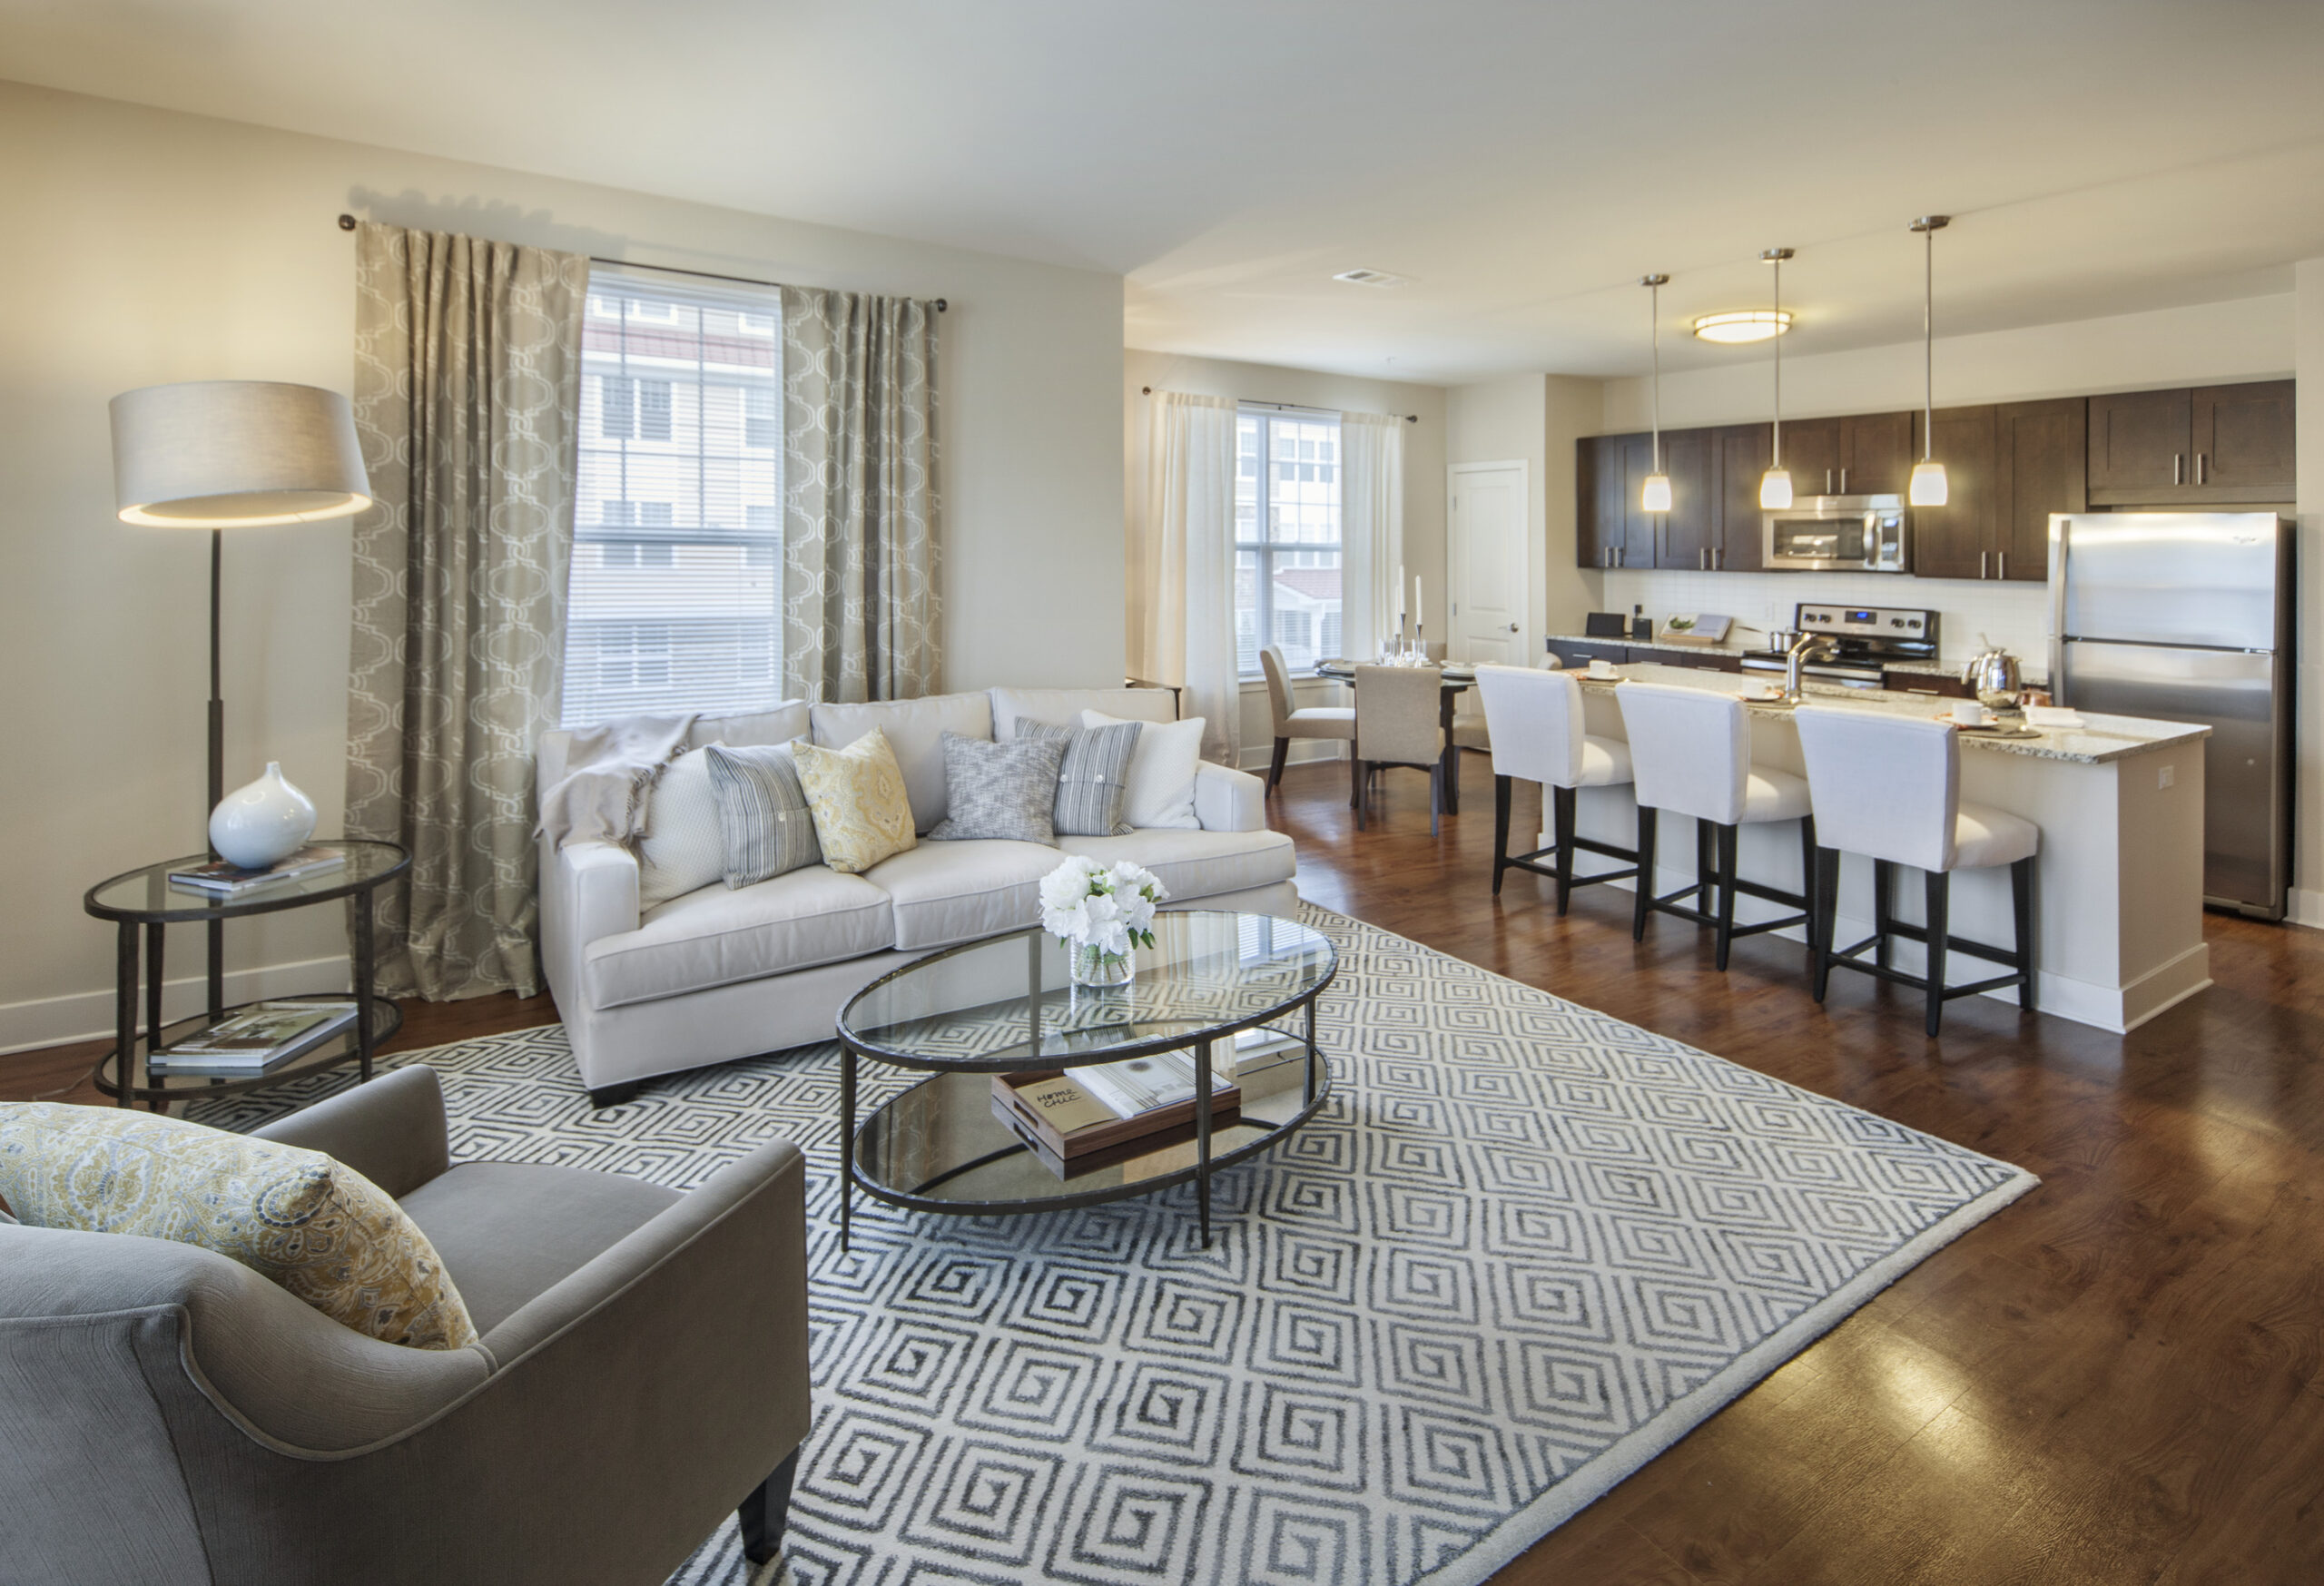 Model living room at Parc Plymouth Meeting with wood-style flooring, couches, and windows with ample natural light